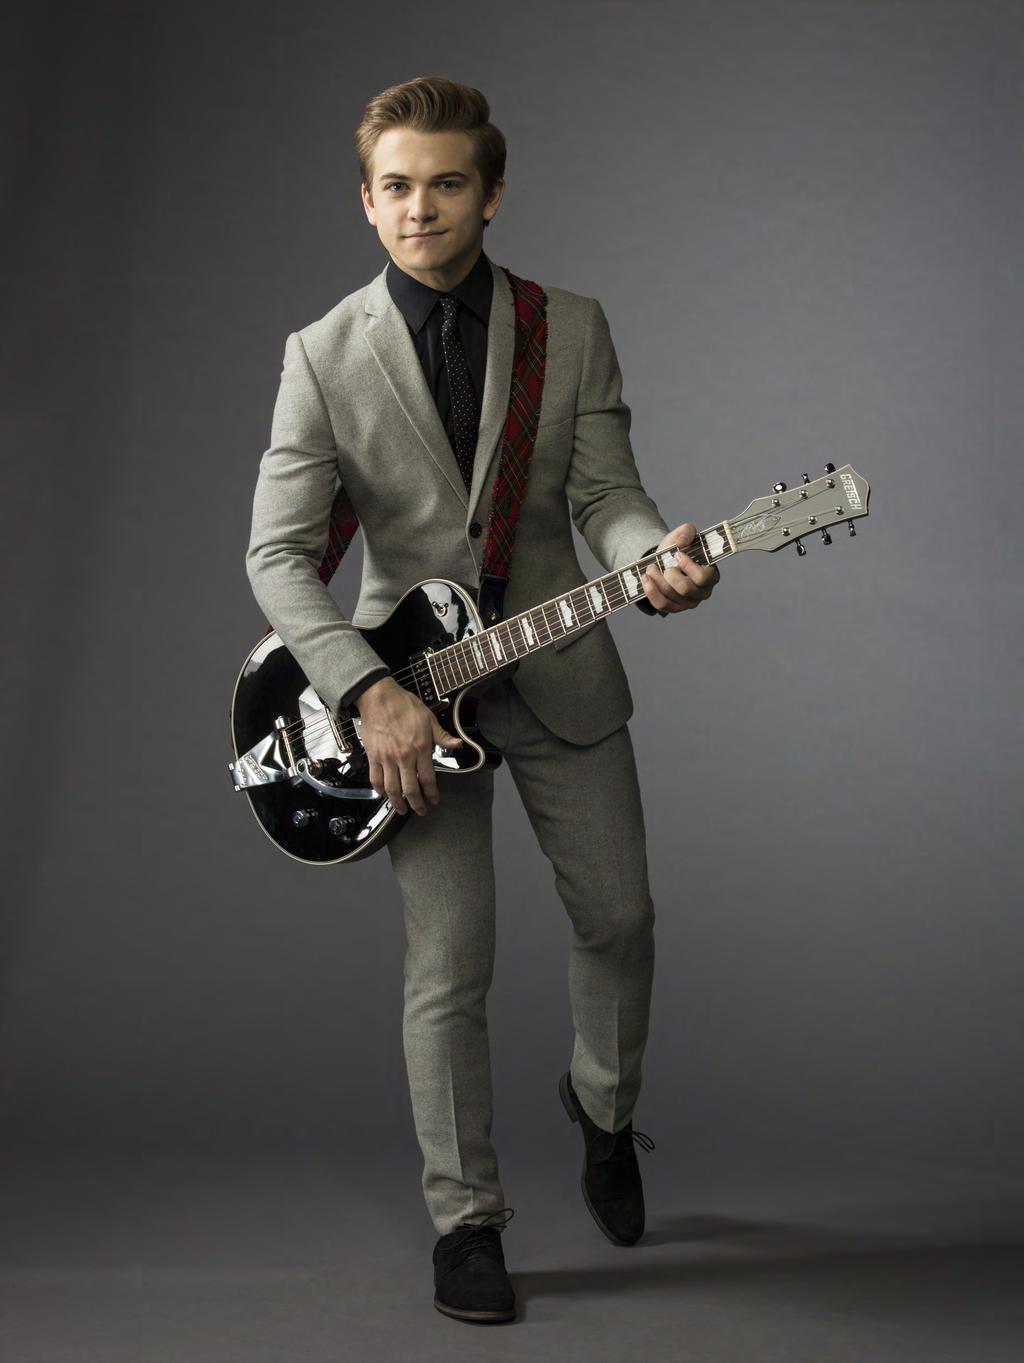 MAN OF MANY WORDS AT 22, HUNTER HAYES HAS HAD A REMARKABLE CAREER AND HE S JUST GETTING STARTED. BY KRISTIN LUNA GUZMAN FOR STOCKLANDMARTEL.